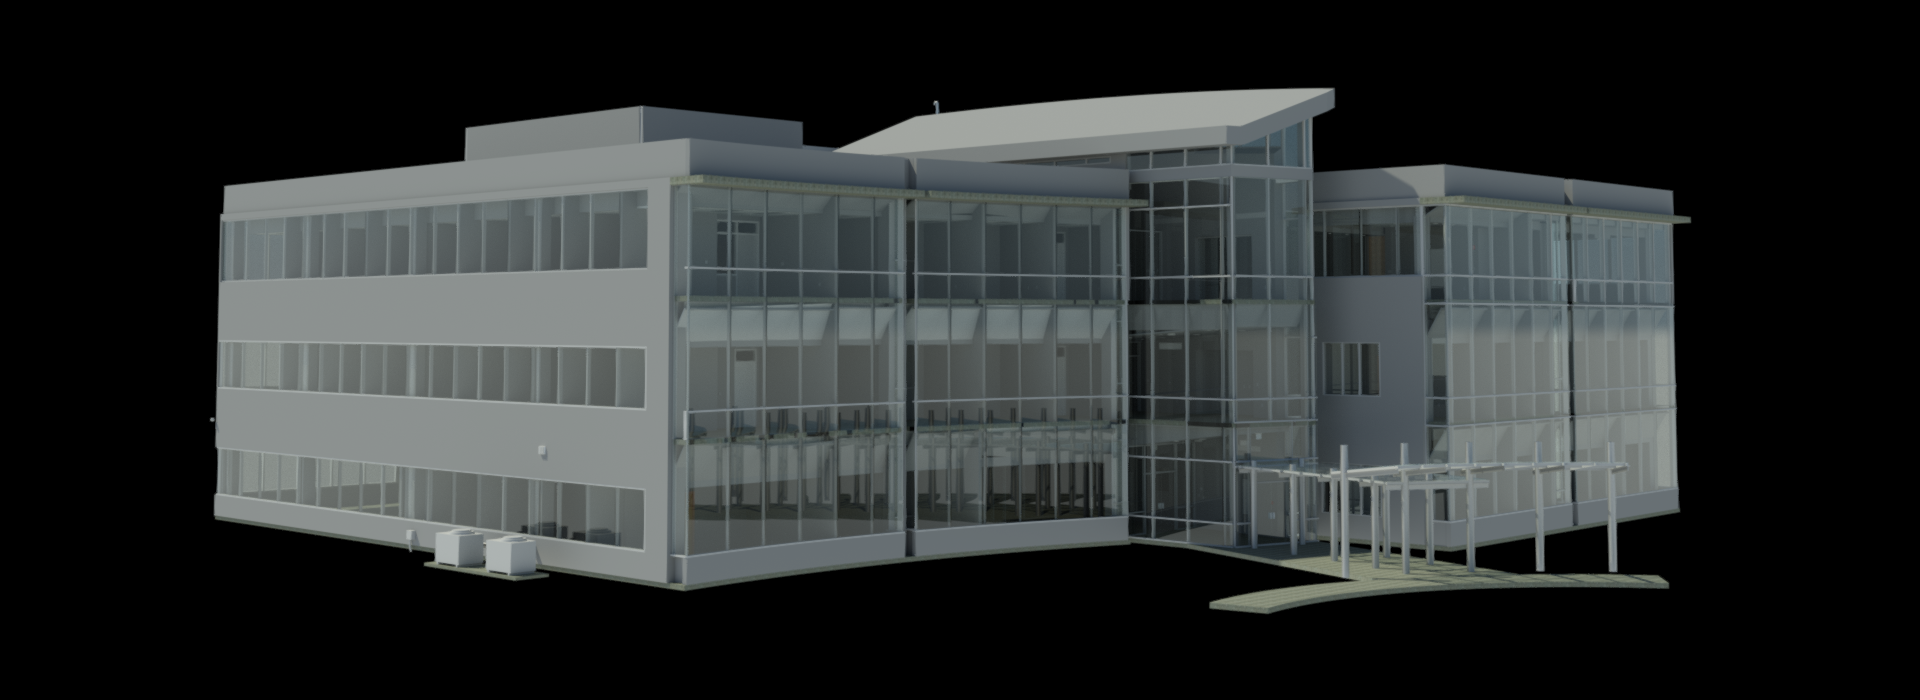 Rendering of an office building. The Revit model is of a 3 story building. The front façade it glass. The sides have 3 rows of glass separated horizontally by stucco. The building has a covered walk running from a circular sidewalk to the main entrance.